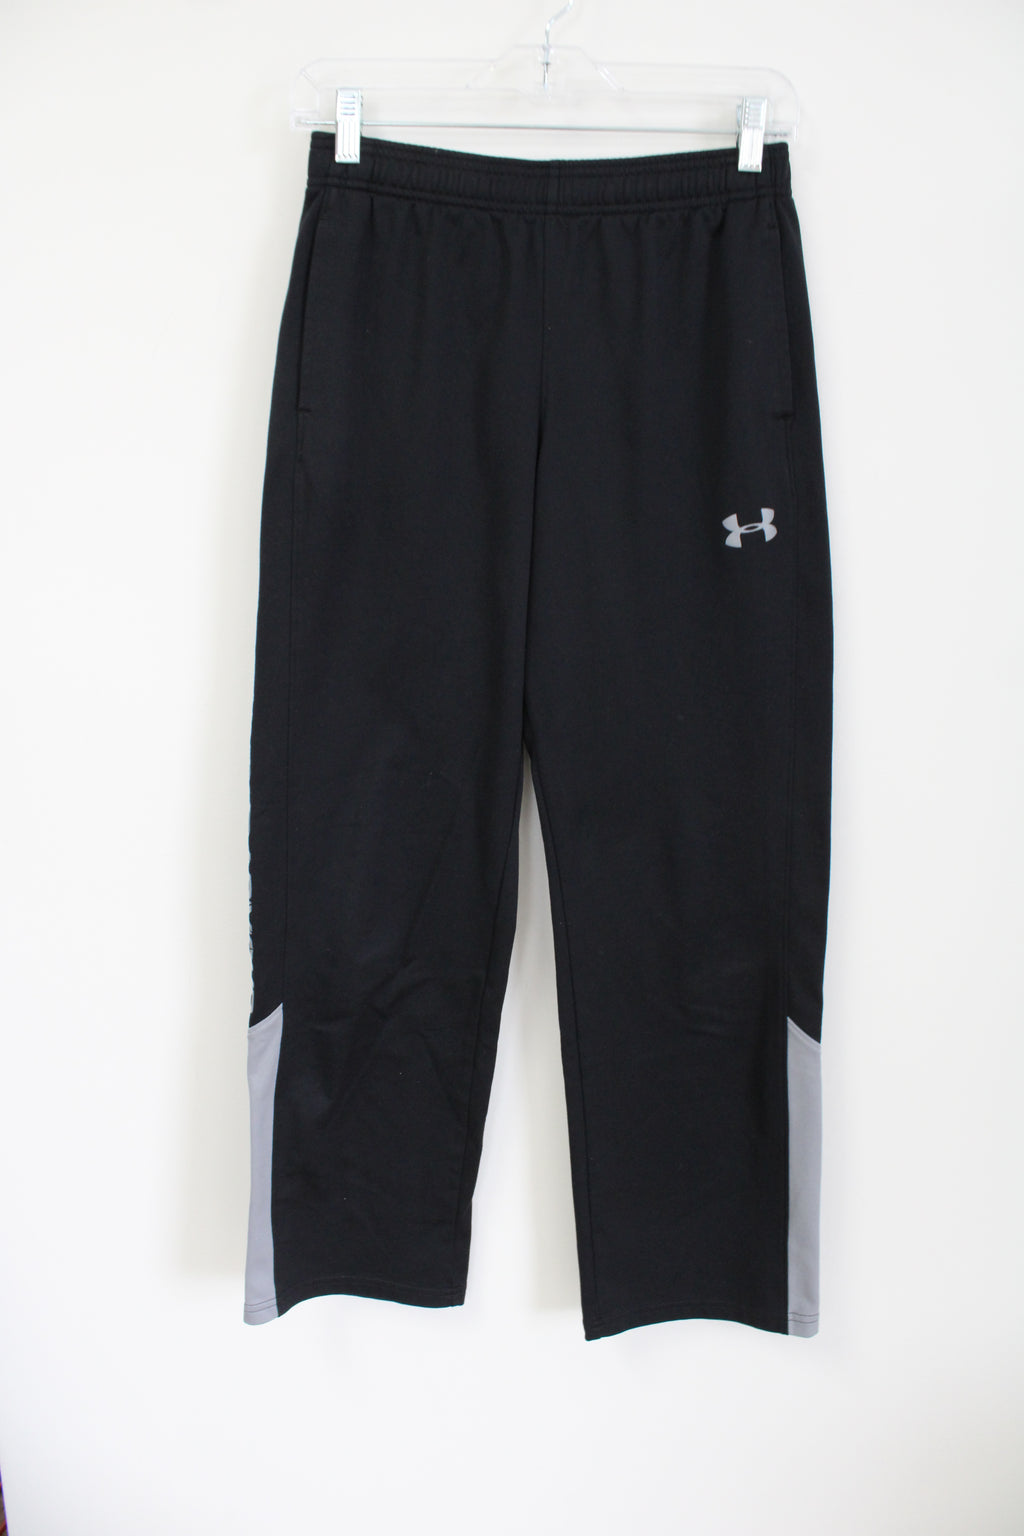 Under Armour Loose Fit Fleece Lined Pants | Youth L (14/16)